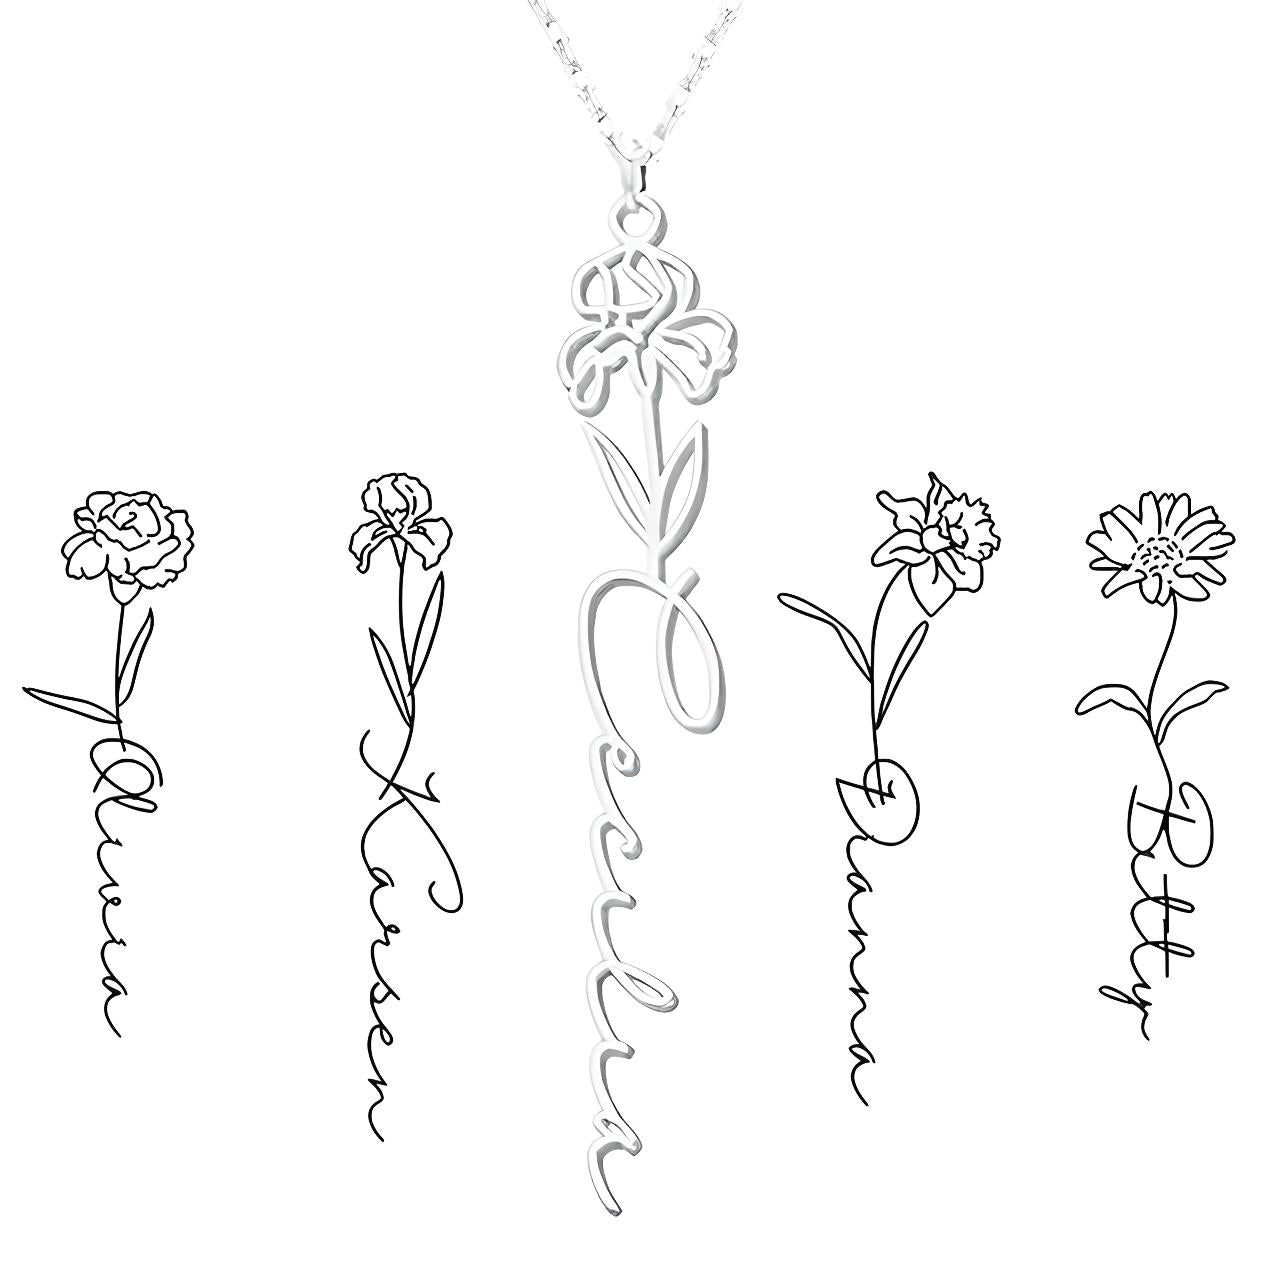 Personalized Birth Flower Necklace